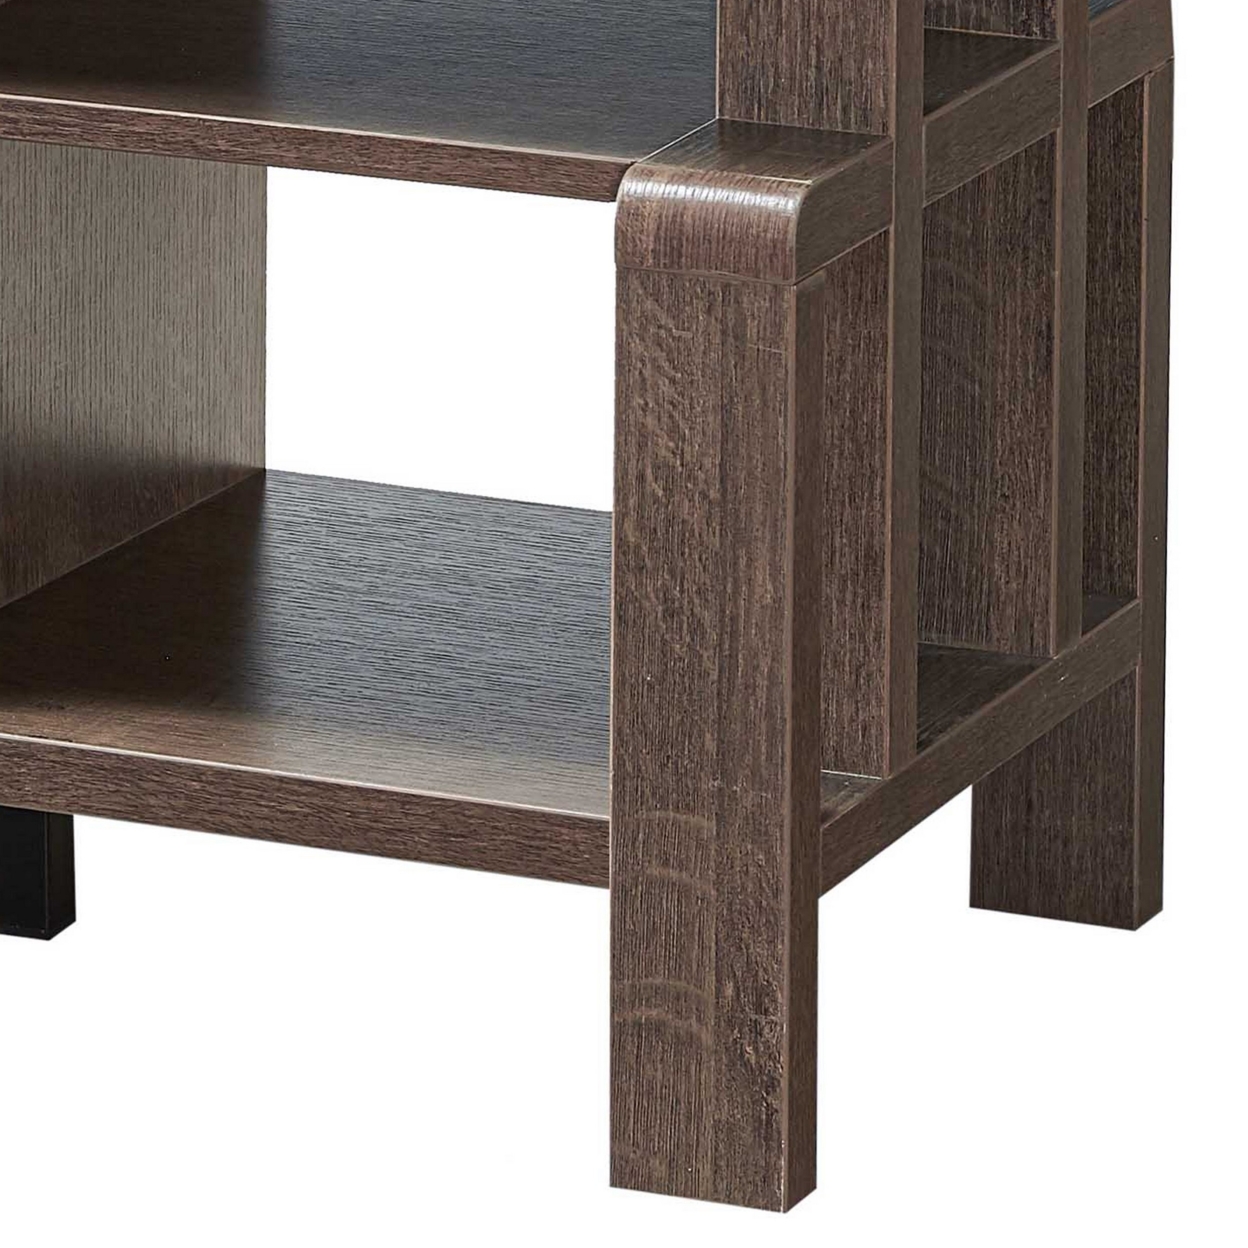 TV Stand With 4 Wooden Shelves And 2 Drawers, Brown- Saltoro Sherpi